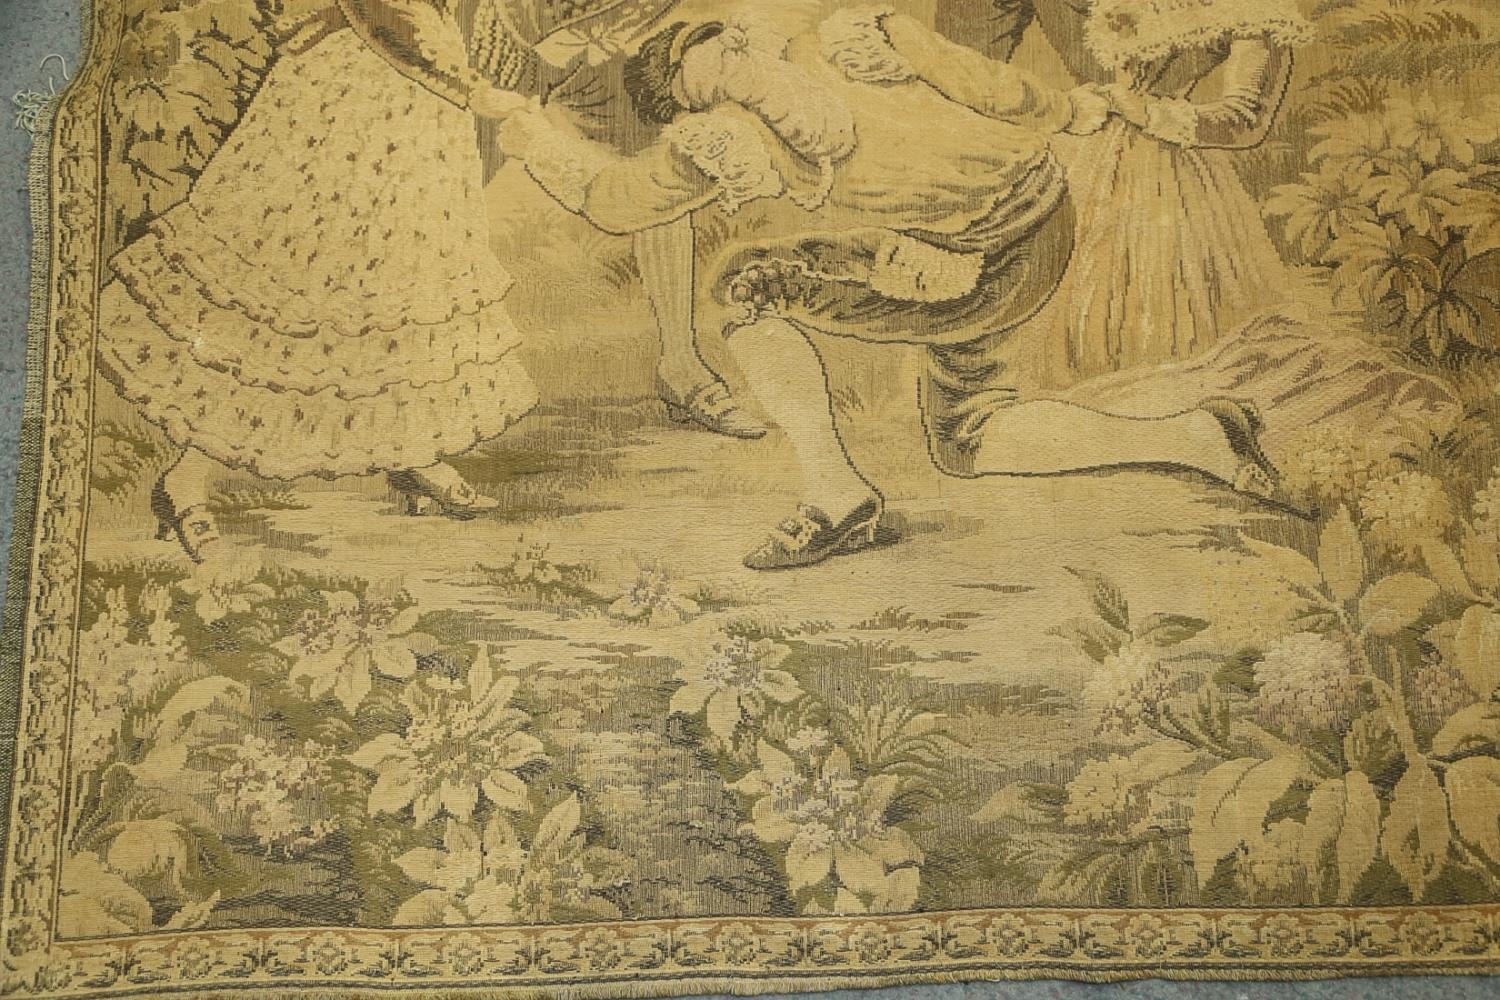 A Jacquard woven figured verdure tapestry panel, 66" high x 70" wide - Image 2 of 3